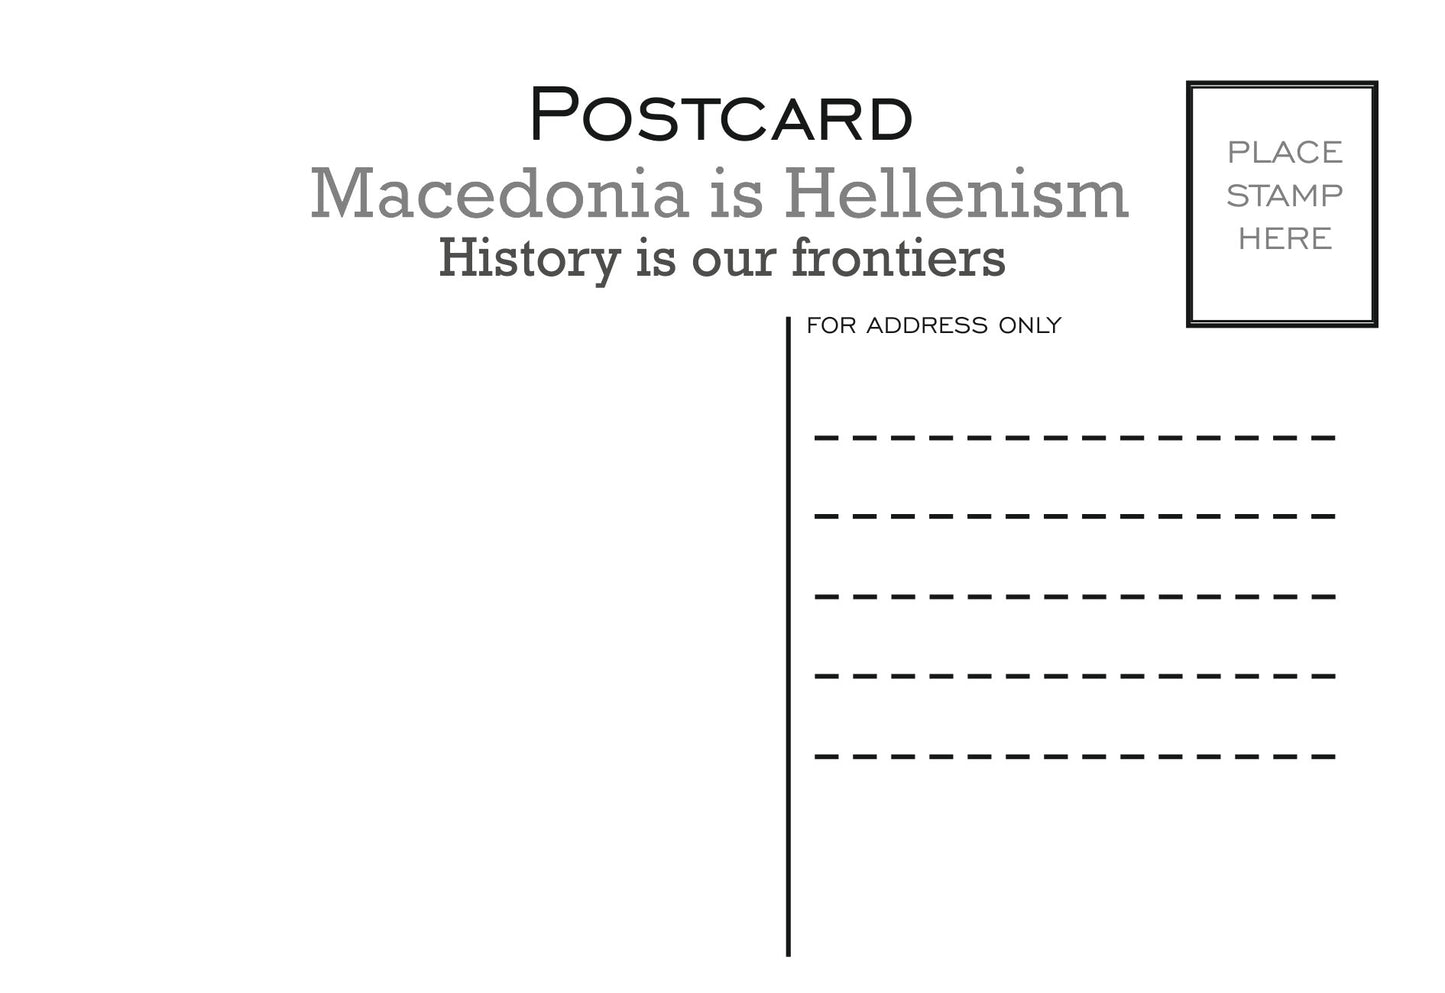 Macedonia is Hellenism (a)